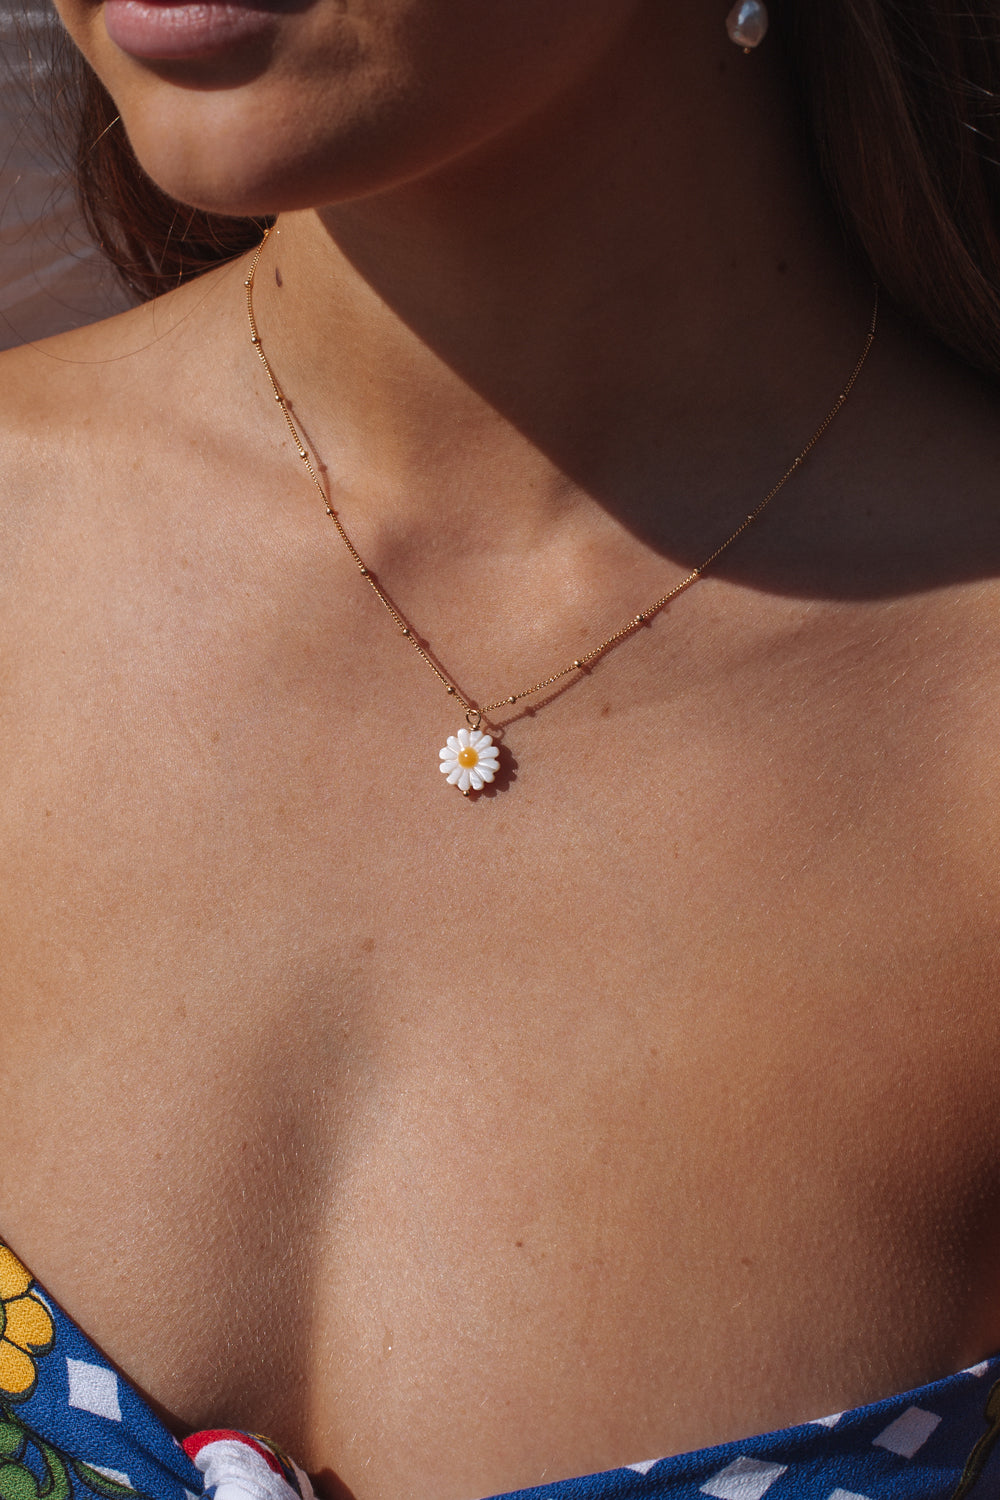 Daisy Satellite Necklace Gold Fill